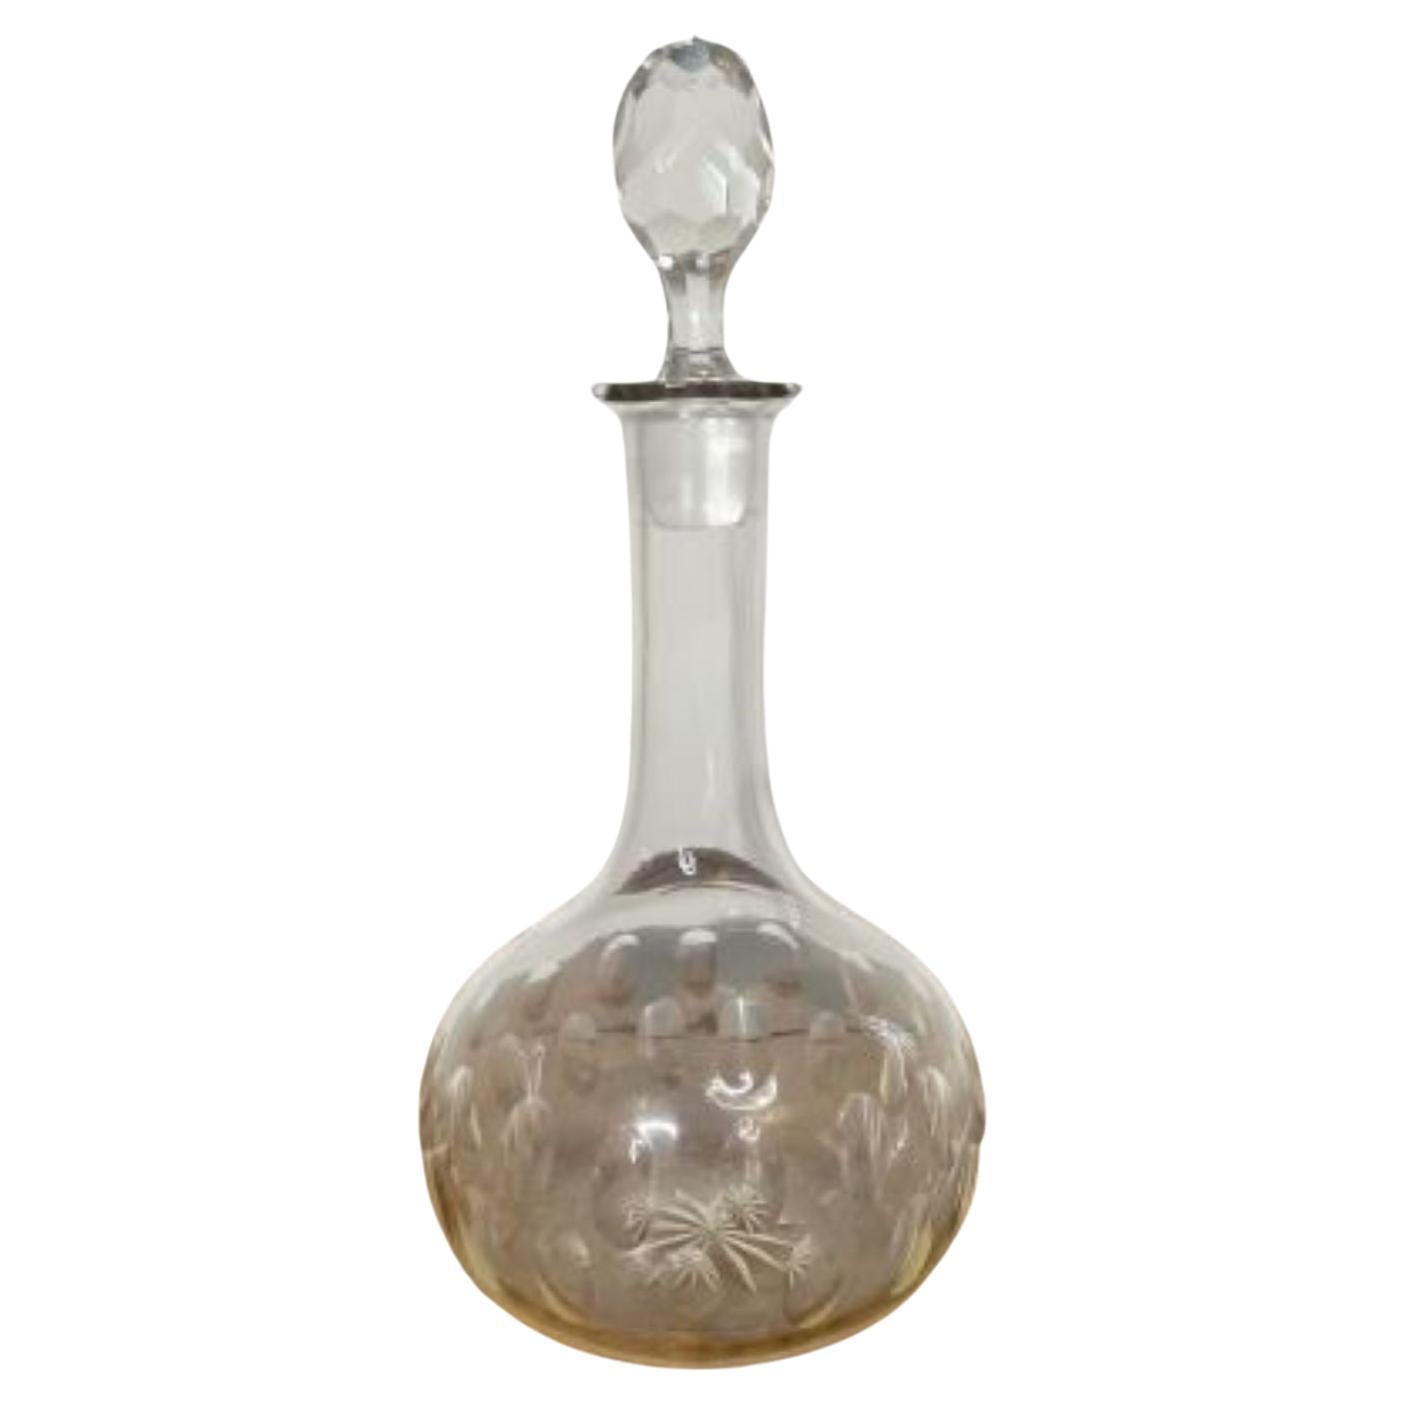 Lovely antique Edwardian glass decanter